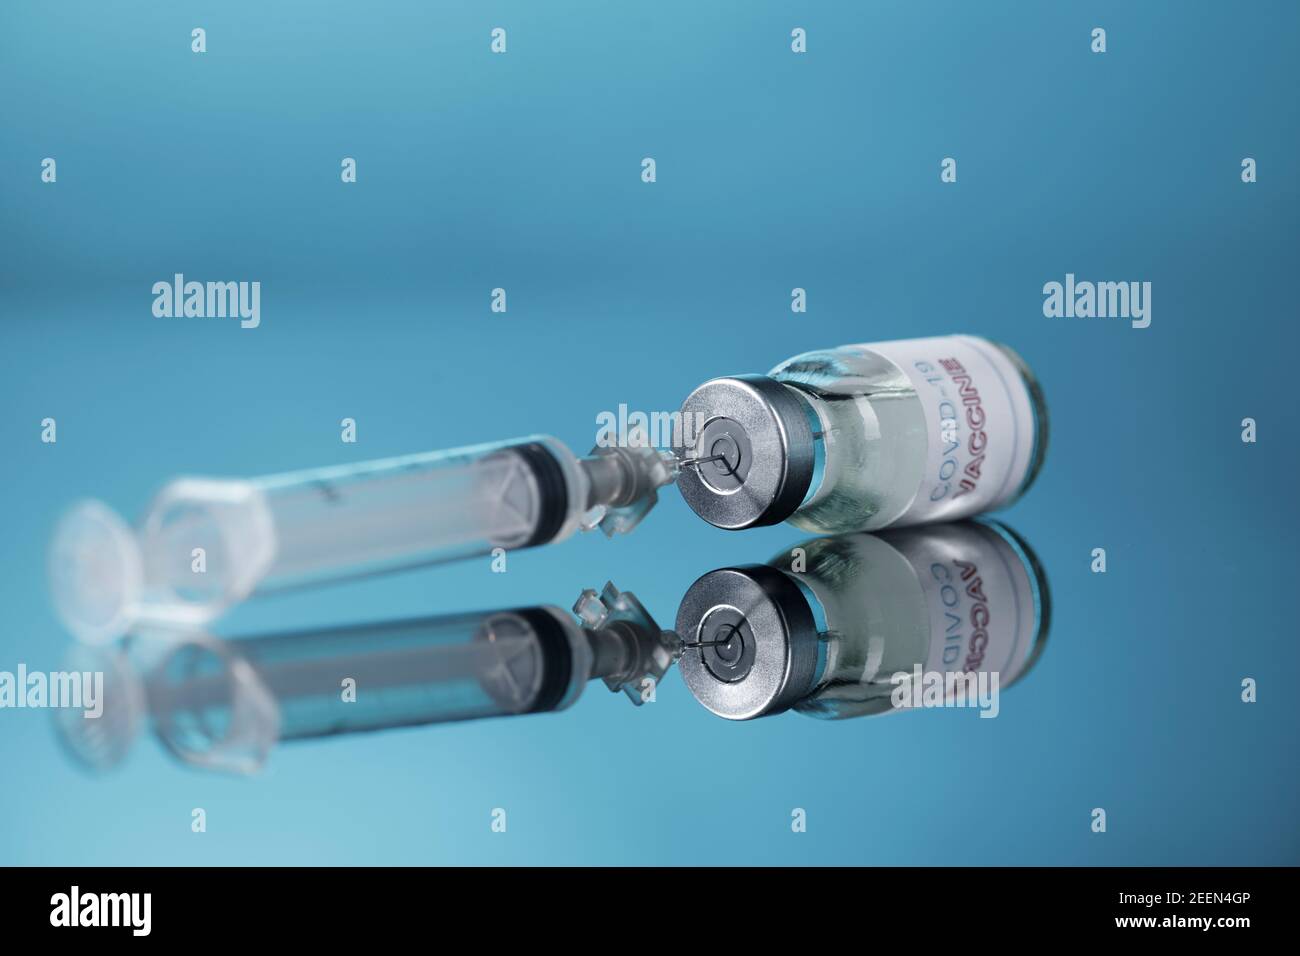 drawing of the anti-covid vaccine with a syringe from a glass fillet, isolated on reflective background Stock Photo